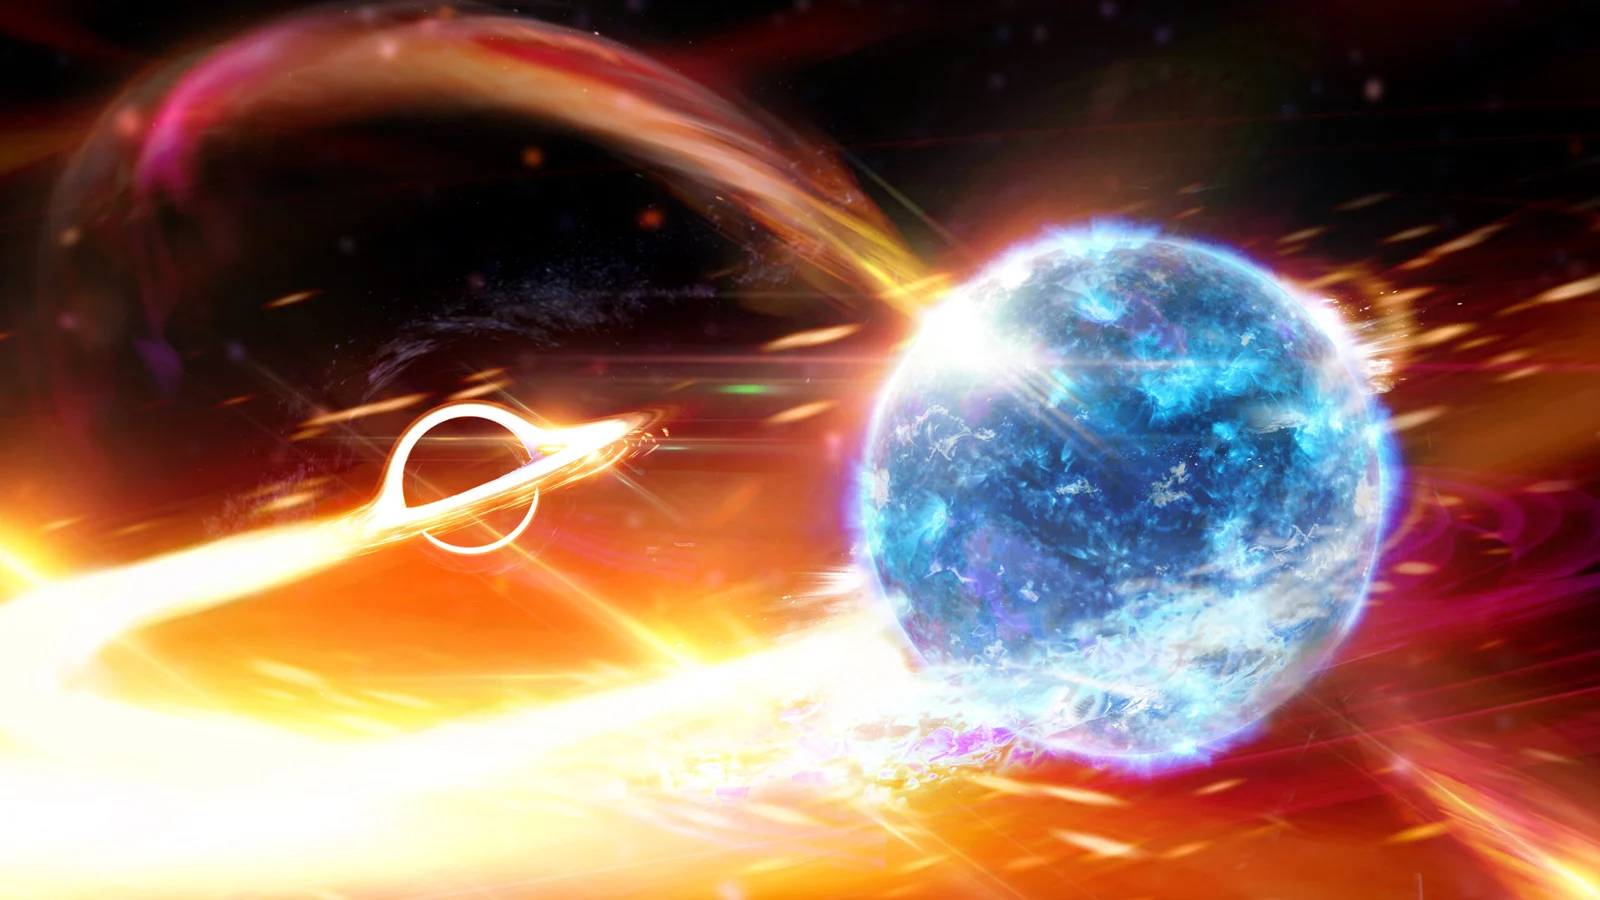 Space-time ripples may point to black hole swallowing a neutron star